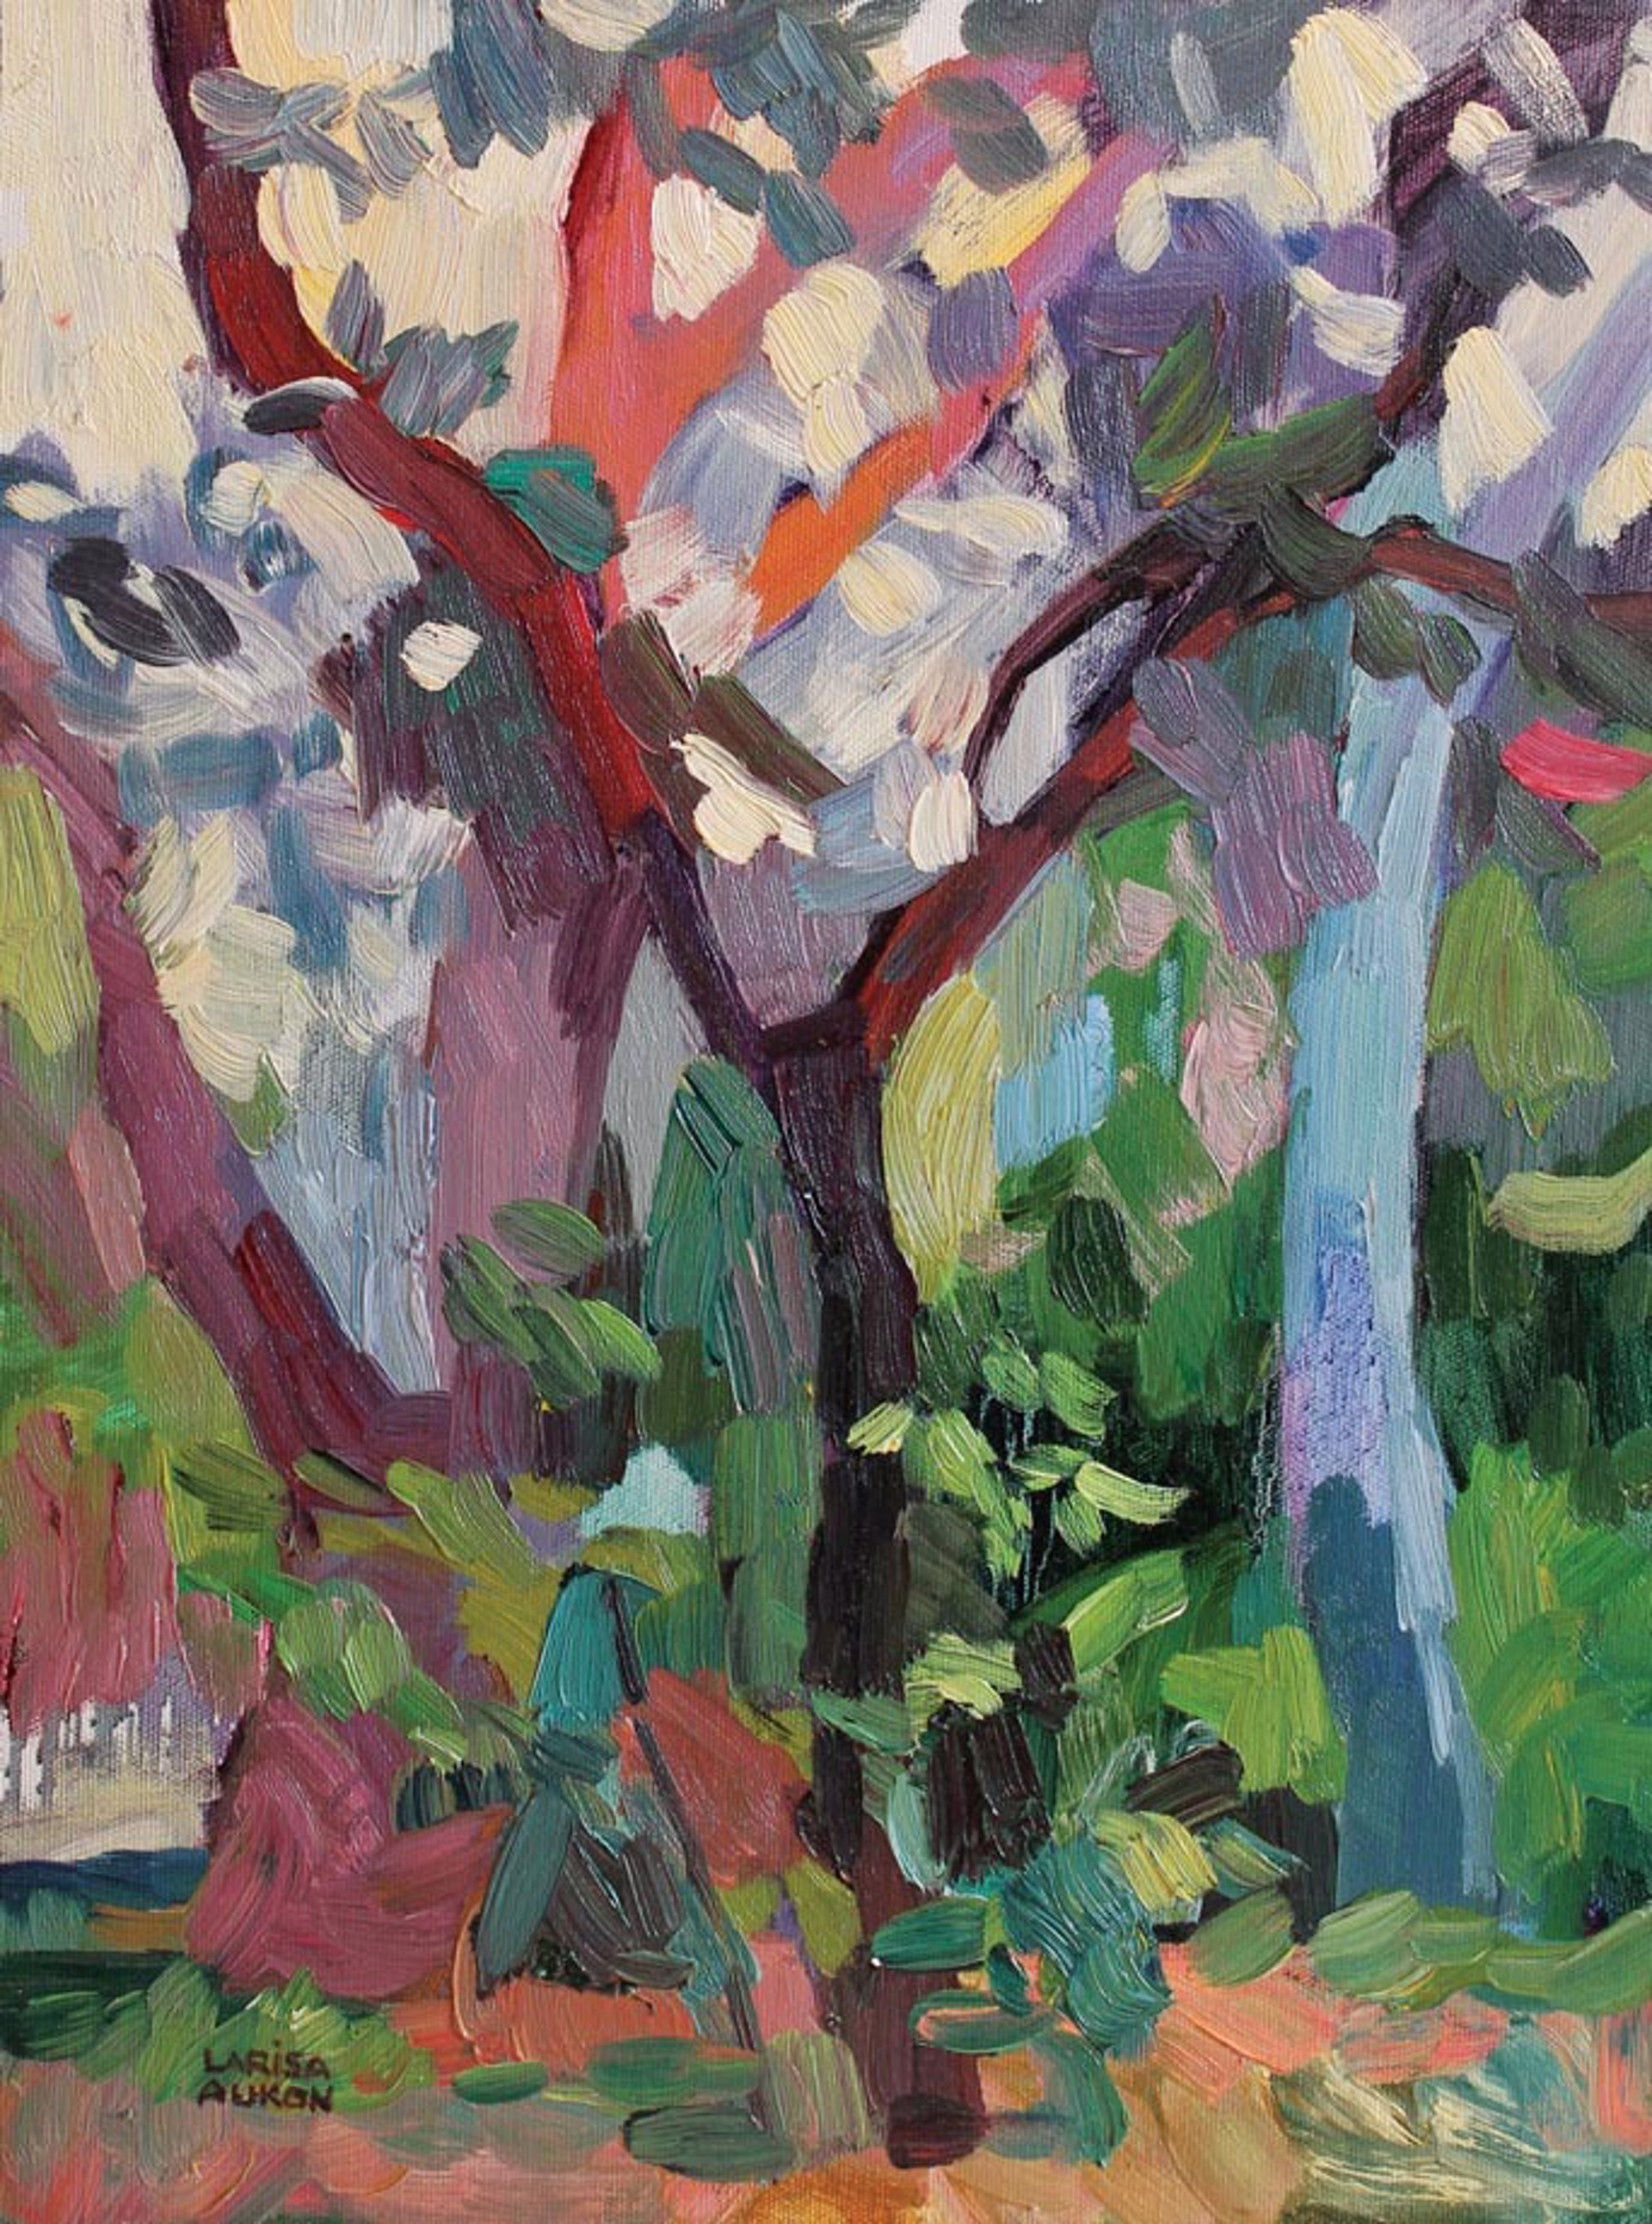 Glimpse of the Forest by Larisa Aukon